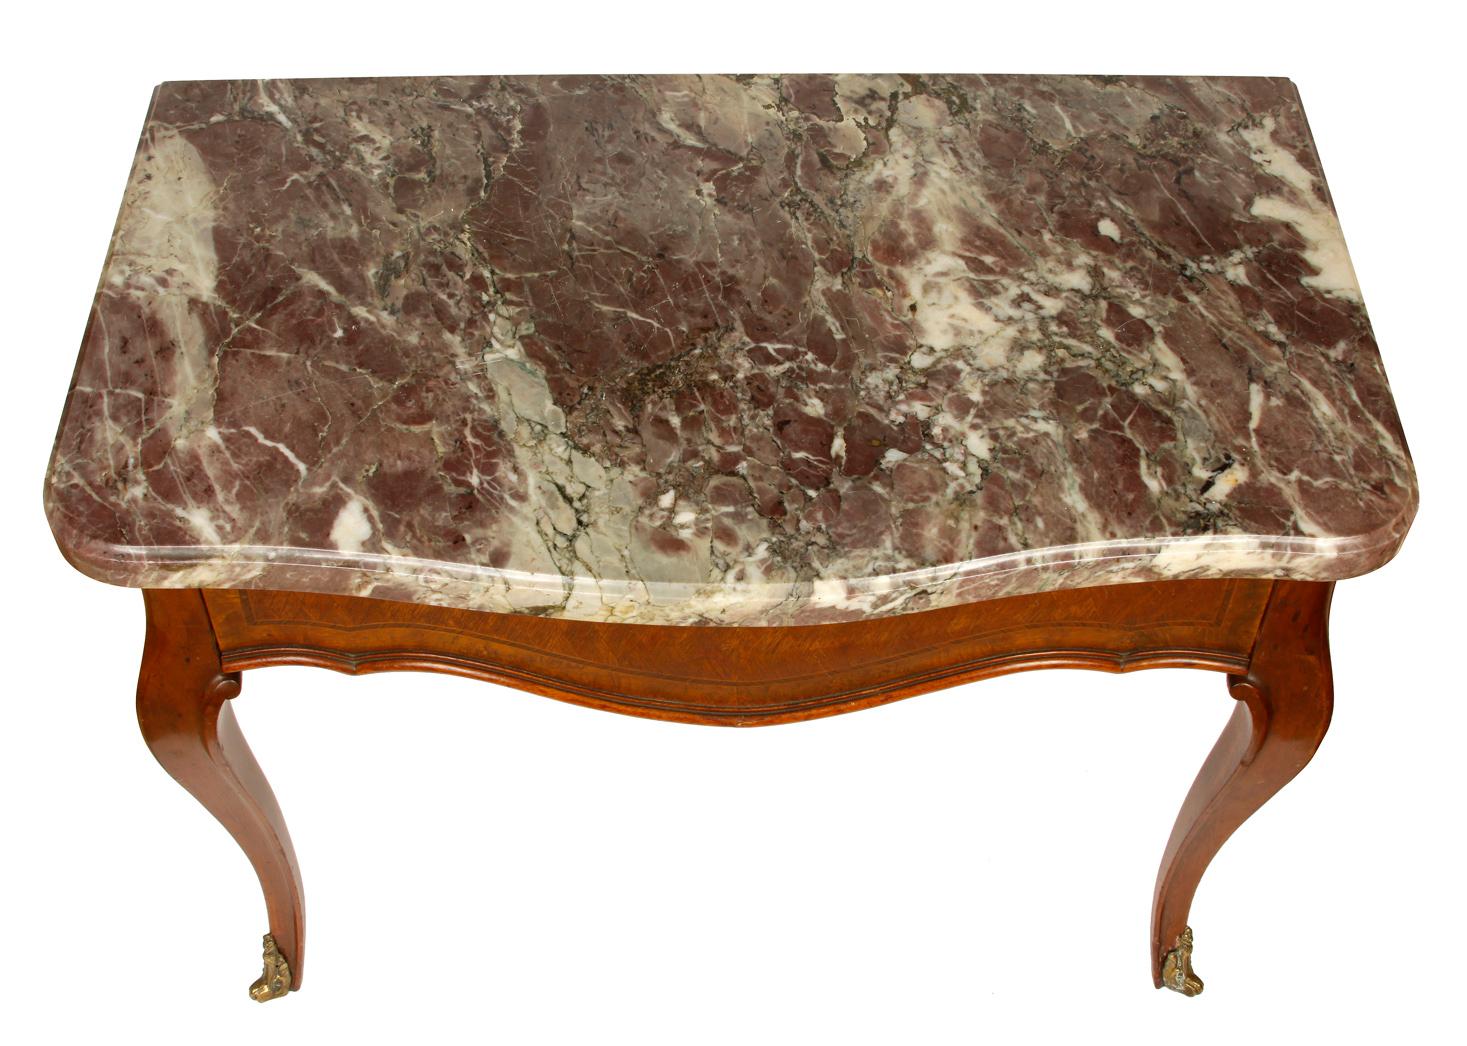 Louis XV style dark rose marble-top table with one drawer and brass details on feet and corners. Measures: 30.75 inches wide x 17.5 inches deep x 24 inches high.